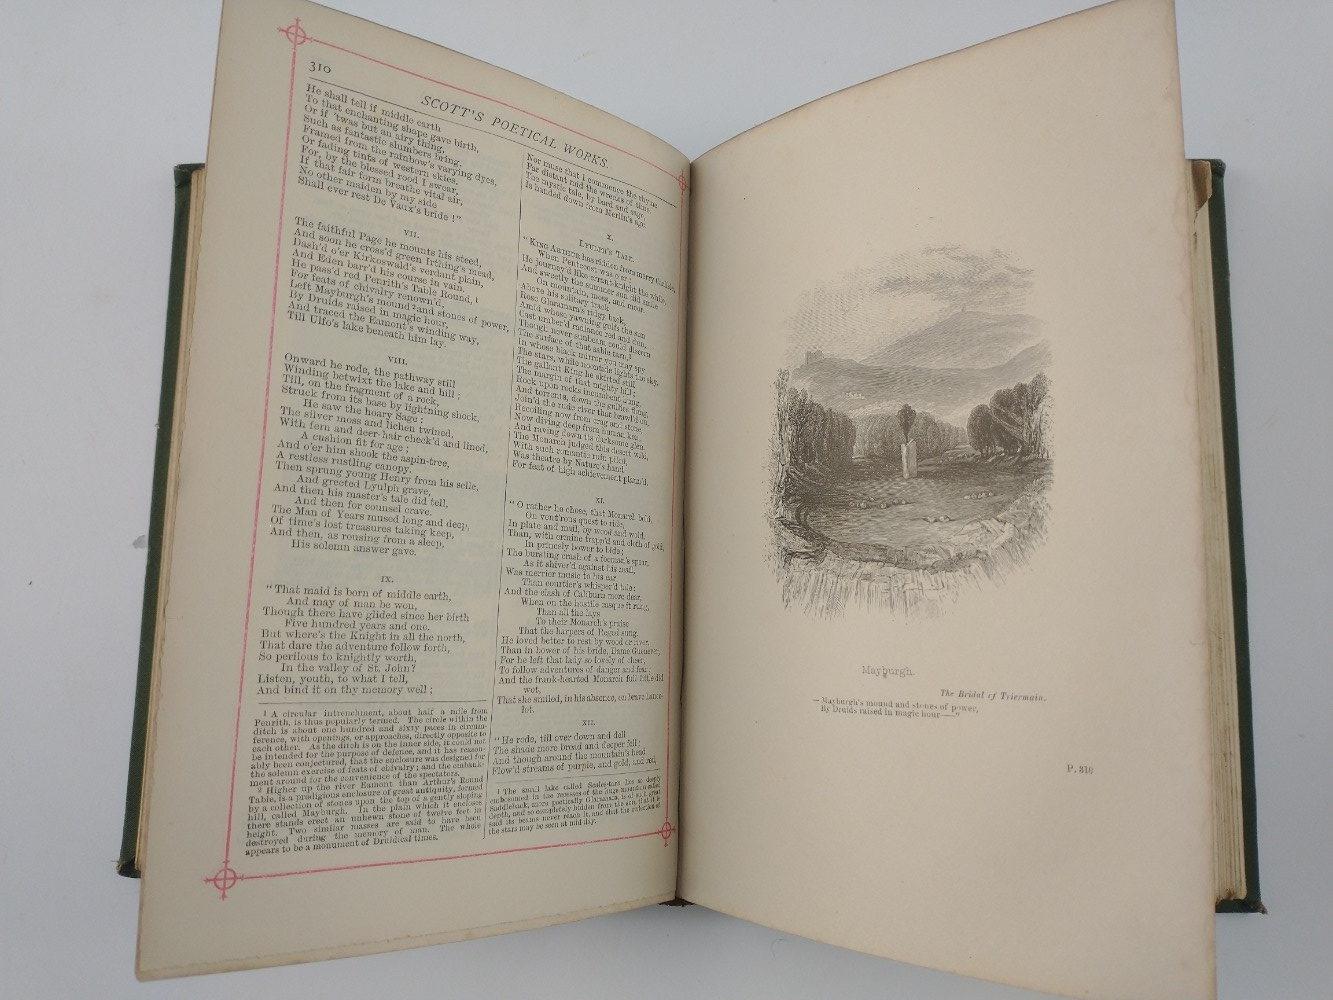 SCOTTS POETICAL WORKS book c1885 printed by George Routledge & Sons London - A NICE EDITION TO - Image 3 of 3